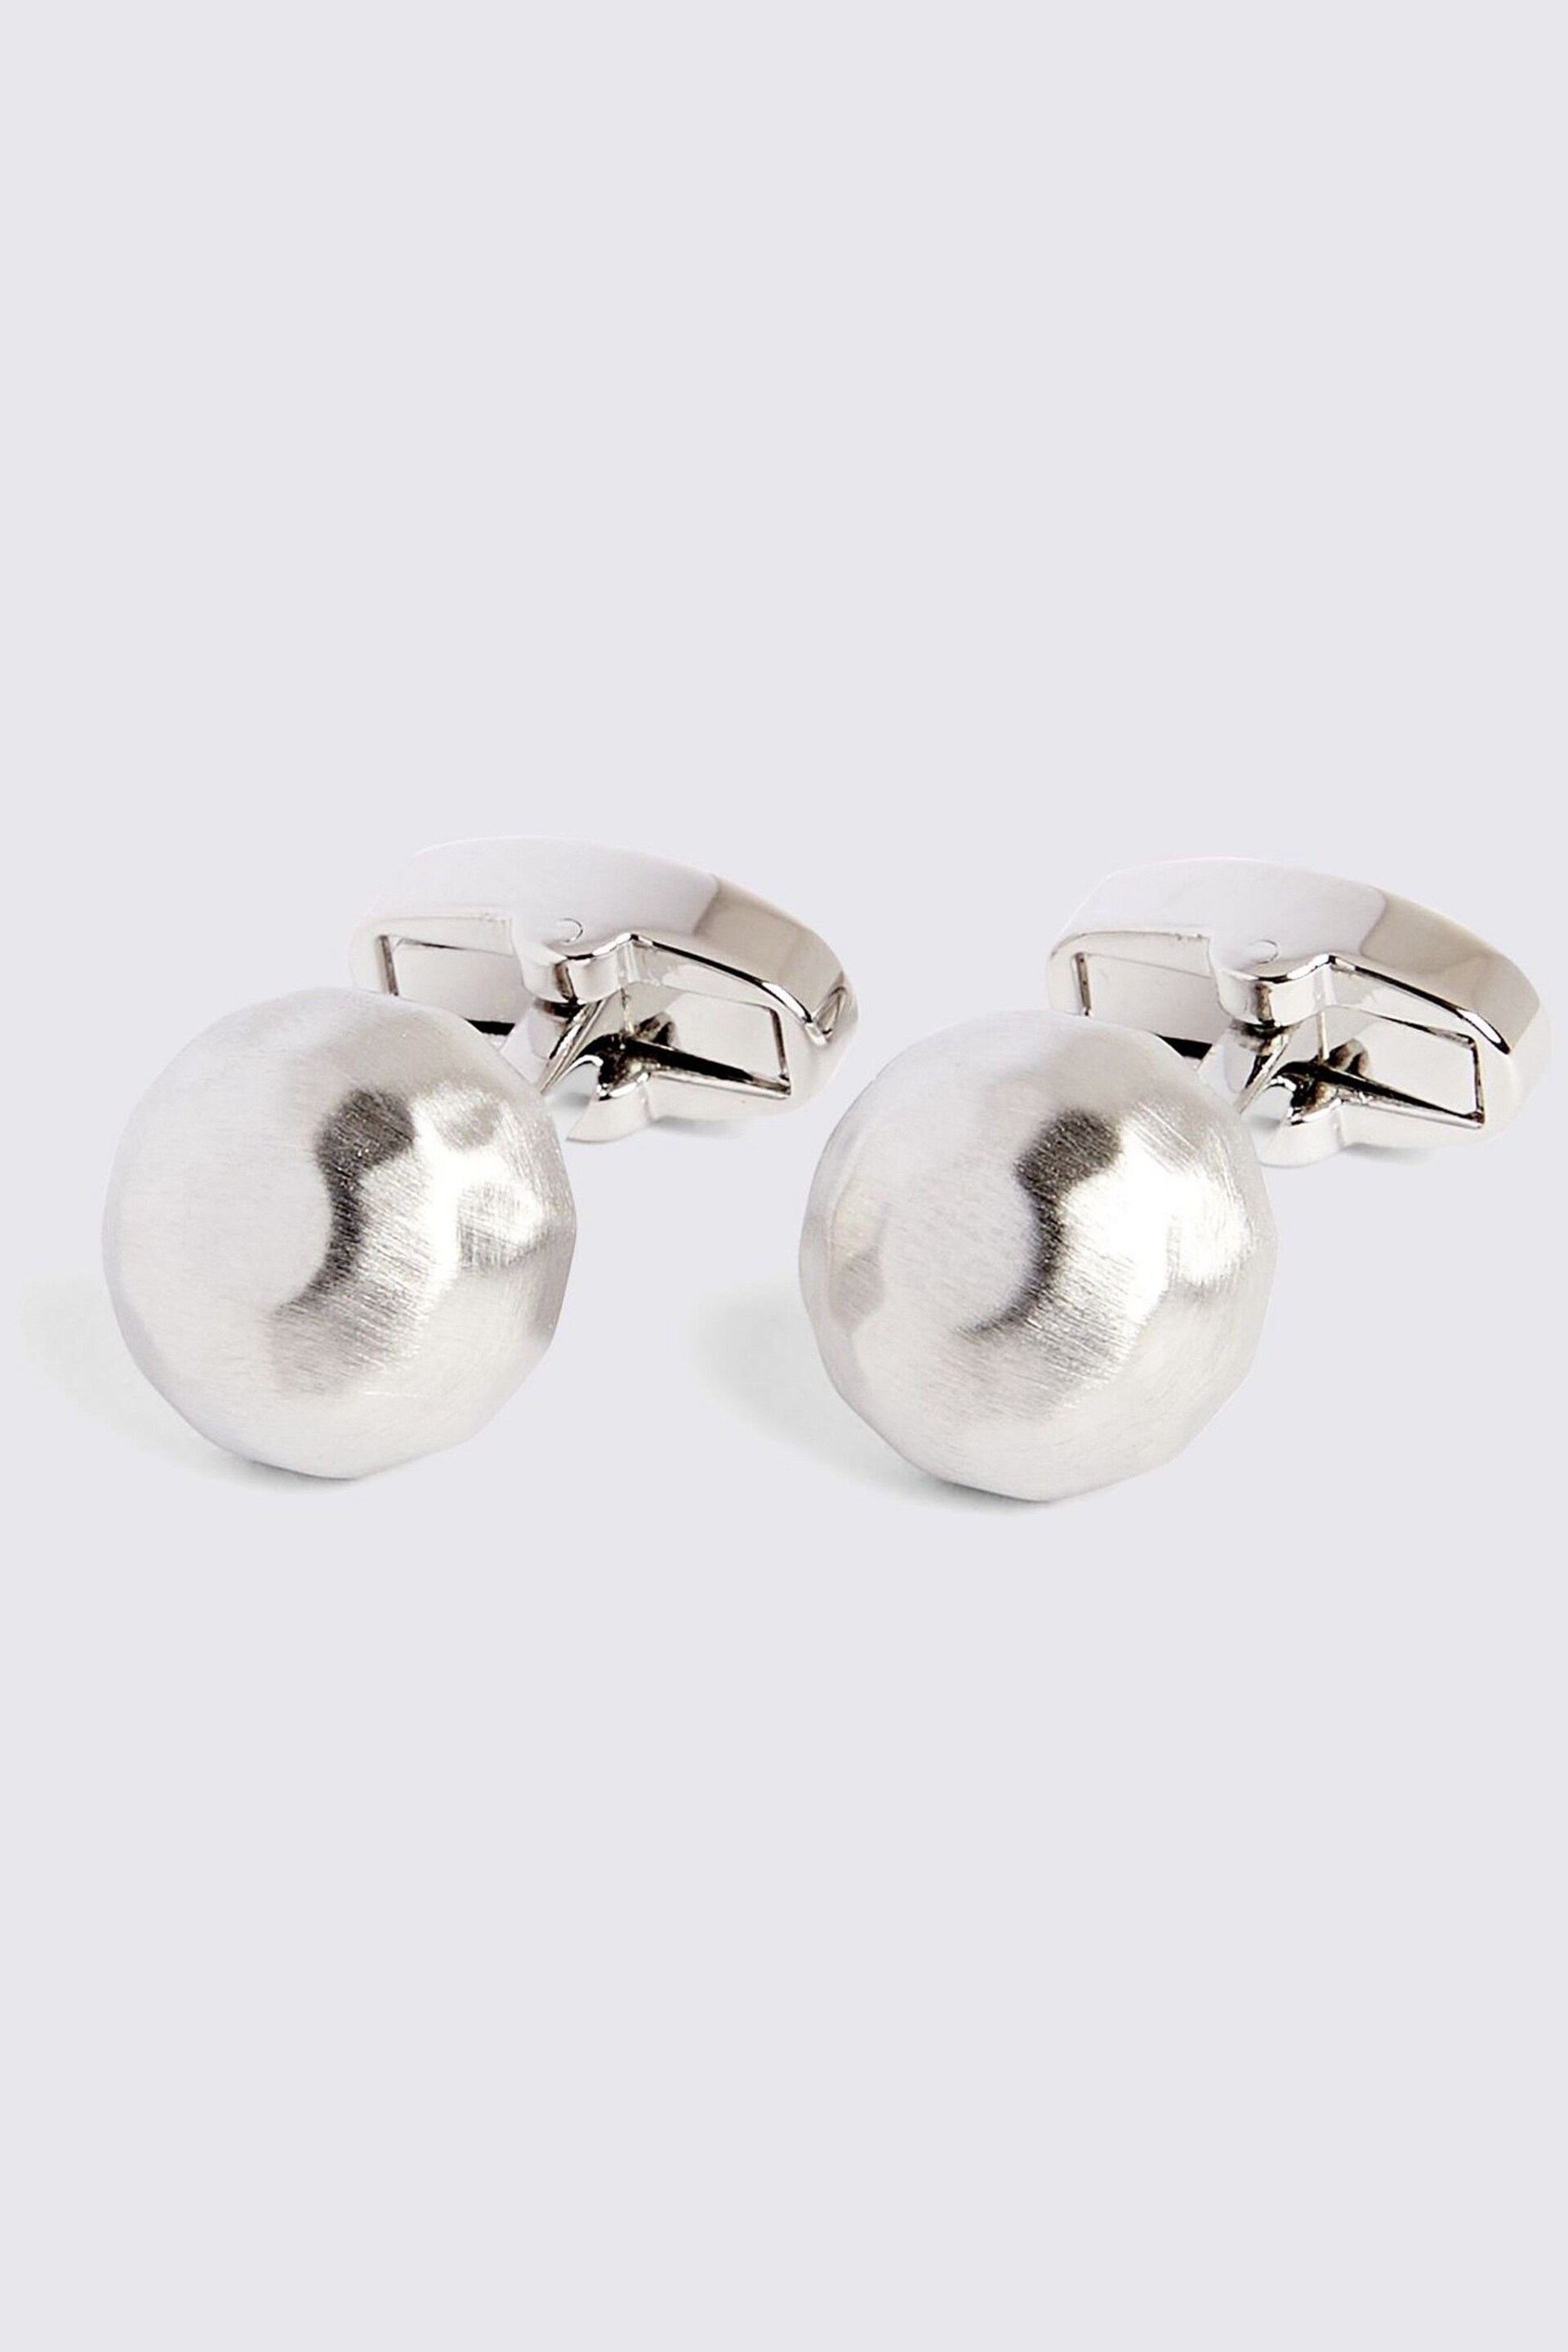 MOSS Grey Brushed Dome Cufflinks - Image 1 of 2